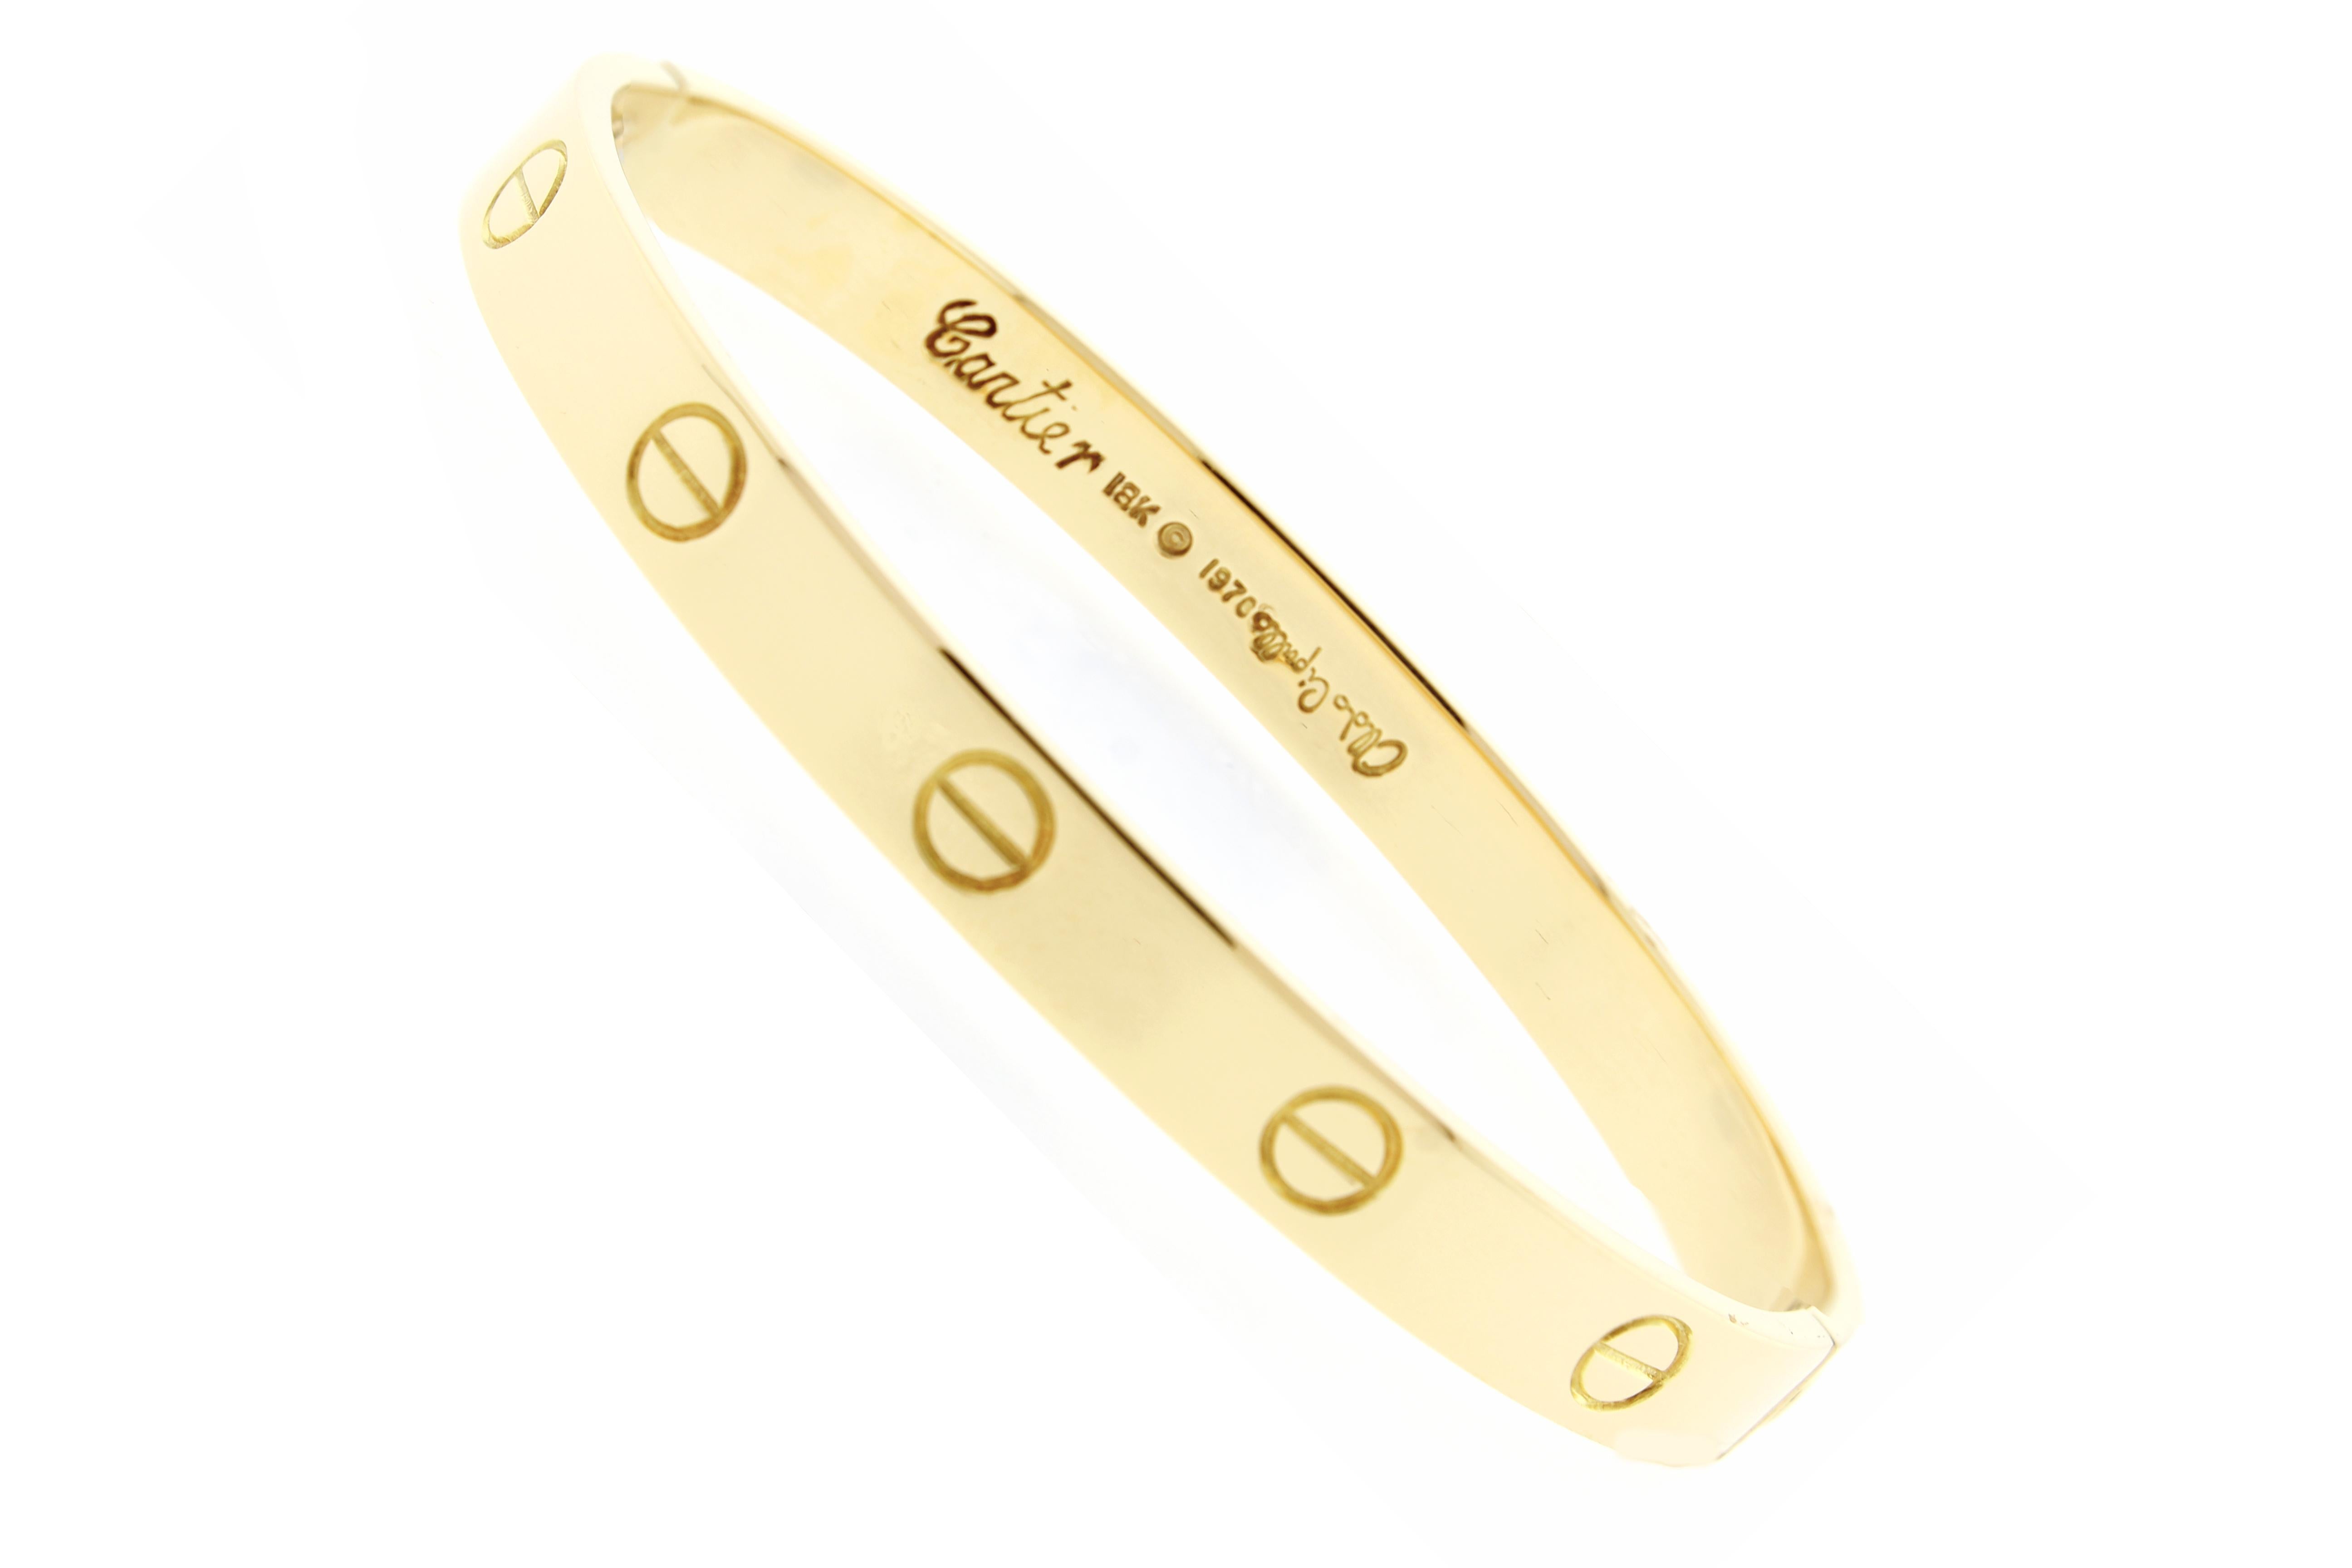  Aldo Cipullo designed the love bracelet for Cartier in 1970.  According to Cipullo, the Cartier Love Bracelet was made to be a love symbol that looked “…semi-permanent—or at least, require a trick to remove…” and should, “…suggest an everlasting